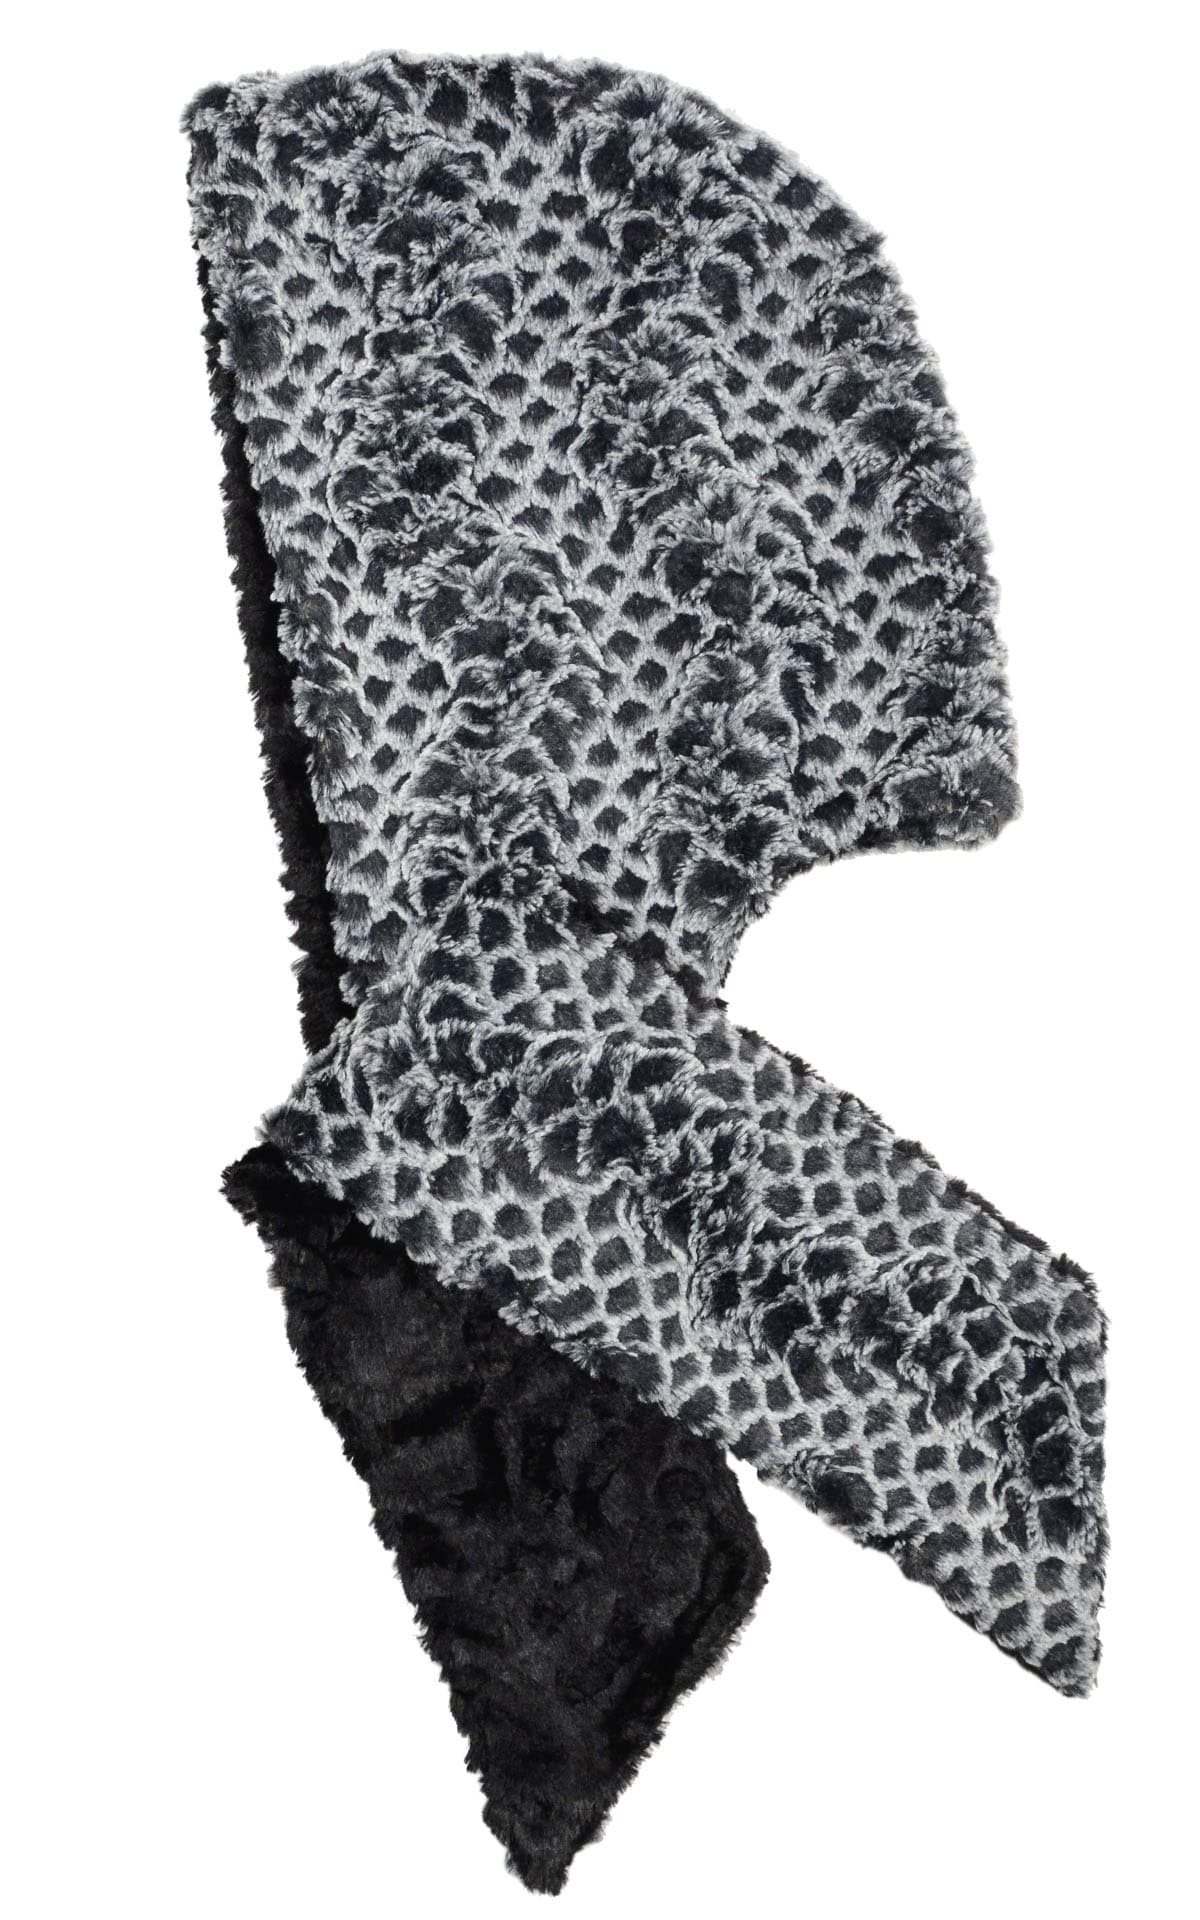 Hoody Scarf - Luxury Faux Fur in Snow Owl with Cuddly Fur in Black - Sold Out!